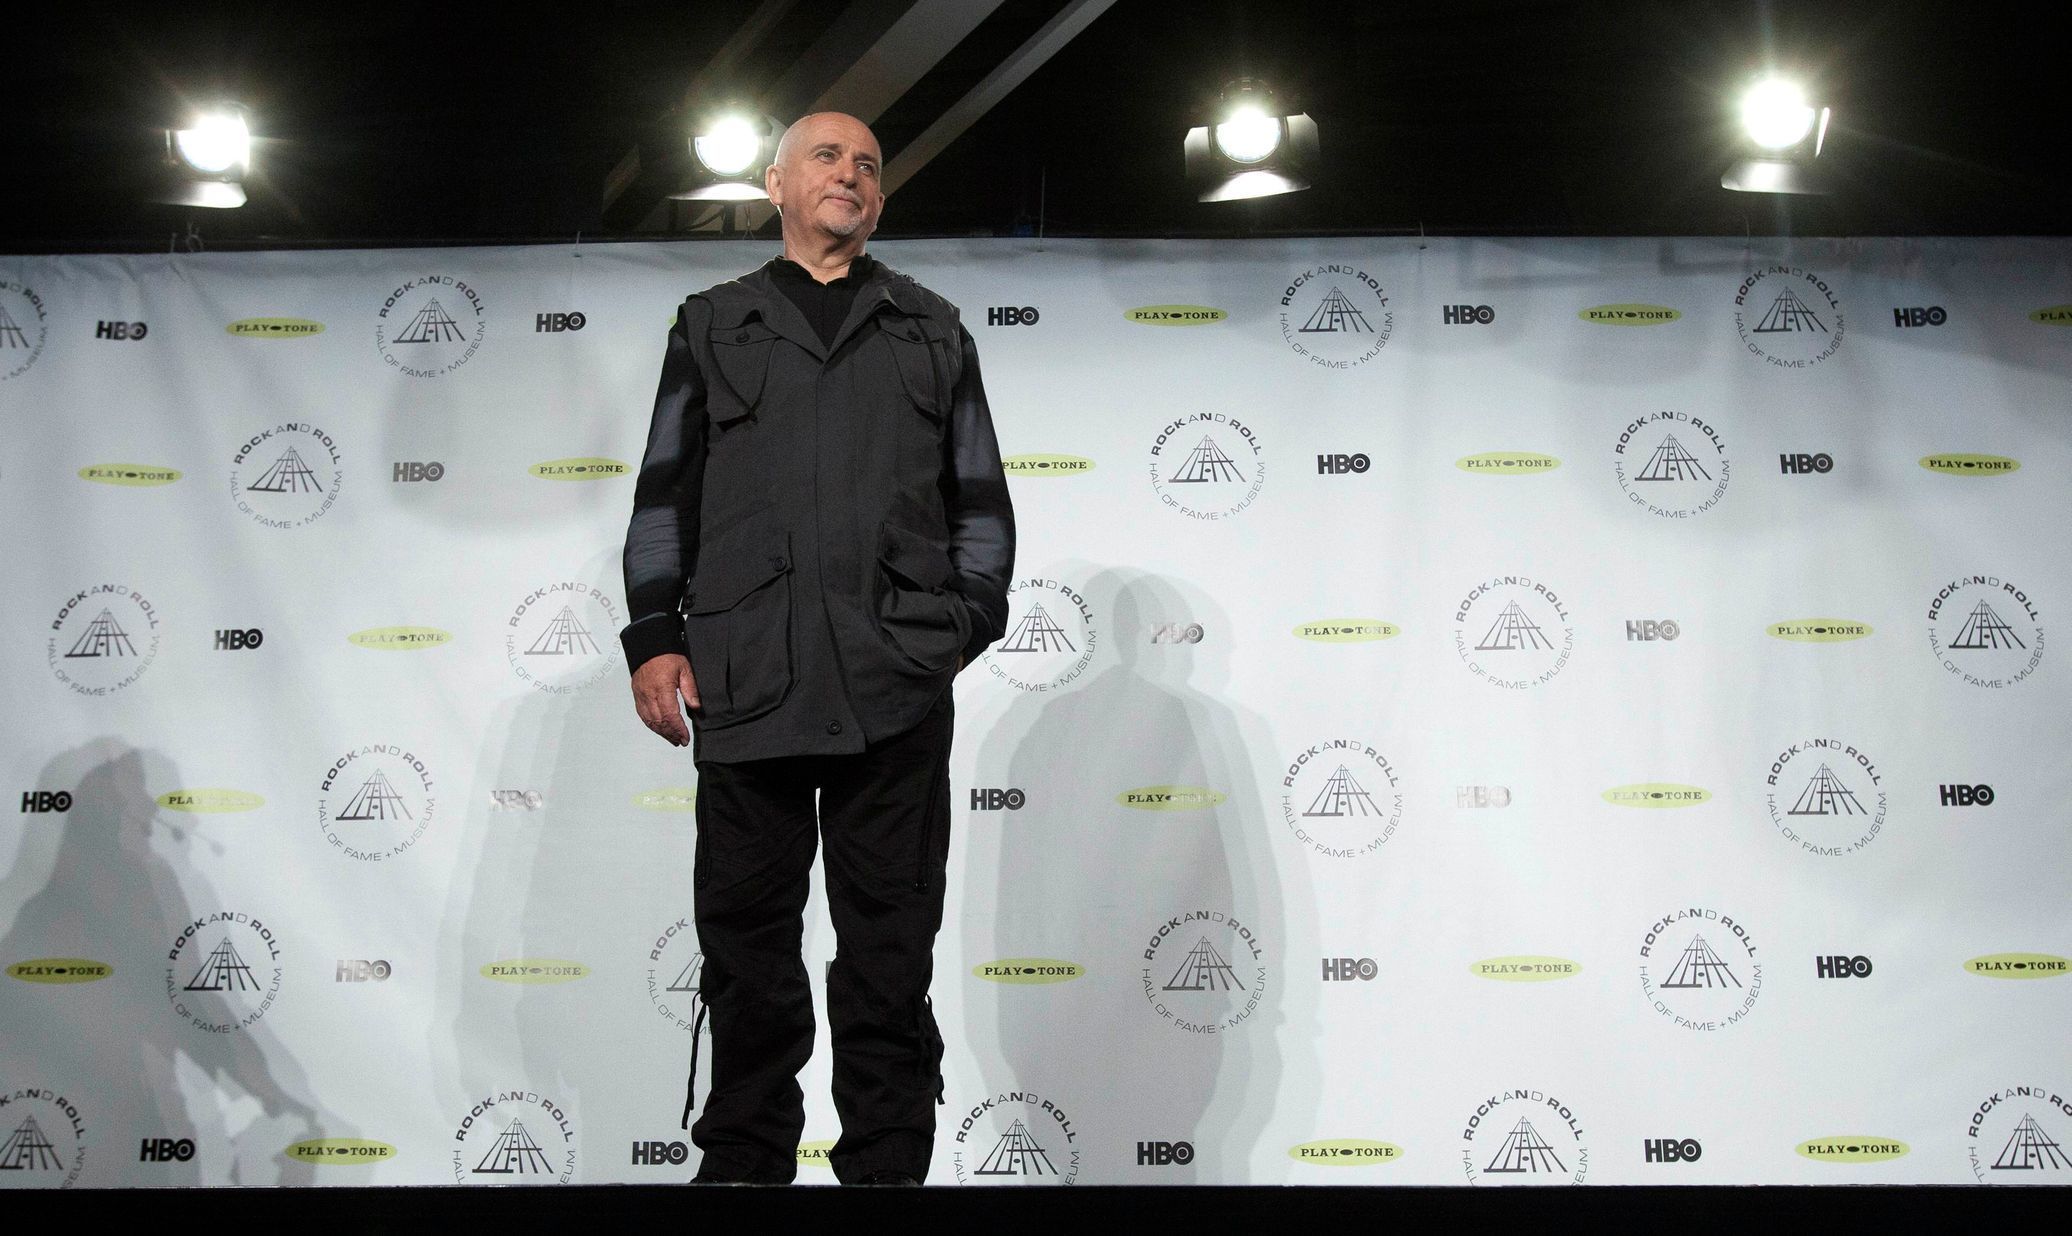 Rock and Roll Hall of Fame Inductee Peter Gabriel poses for photos backstage after the ceremony in Brooklyn, New York